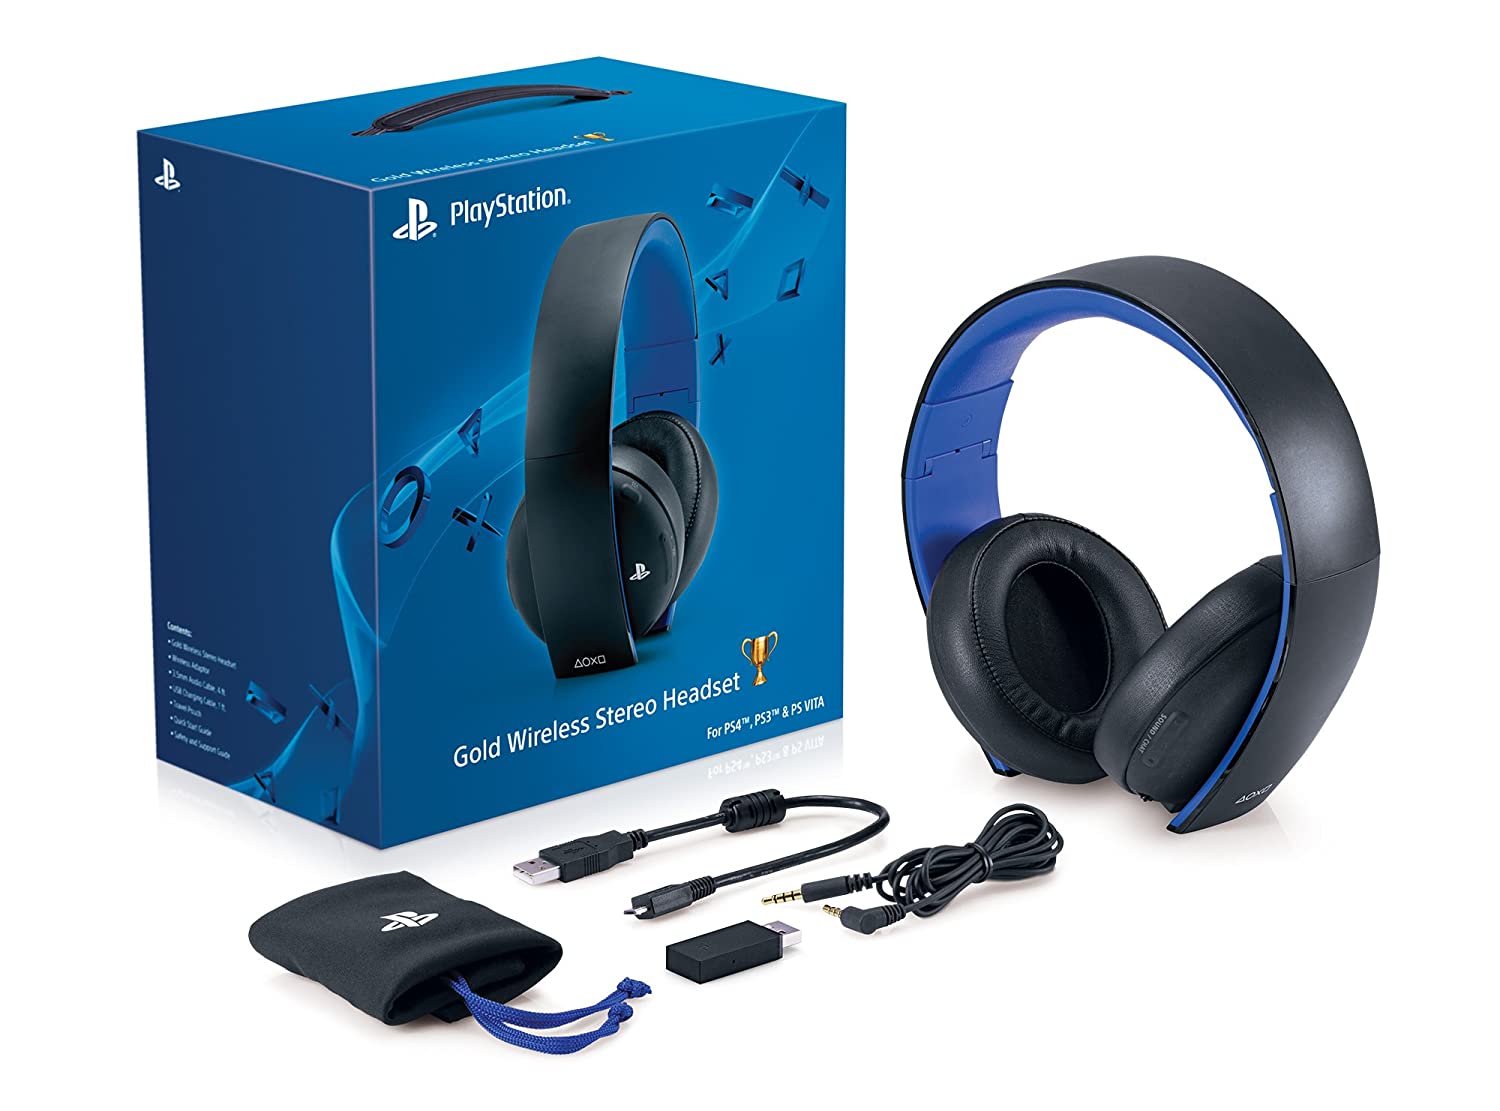 Bluetooth Headset compatible with PS3 and PS4?